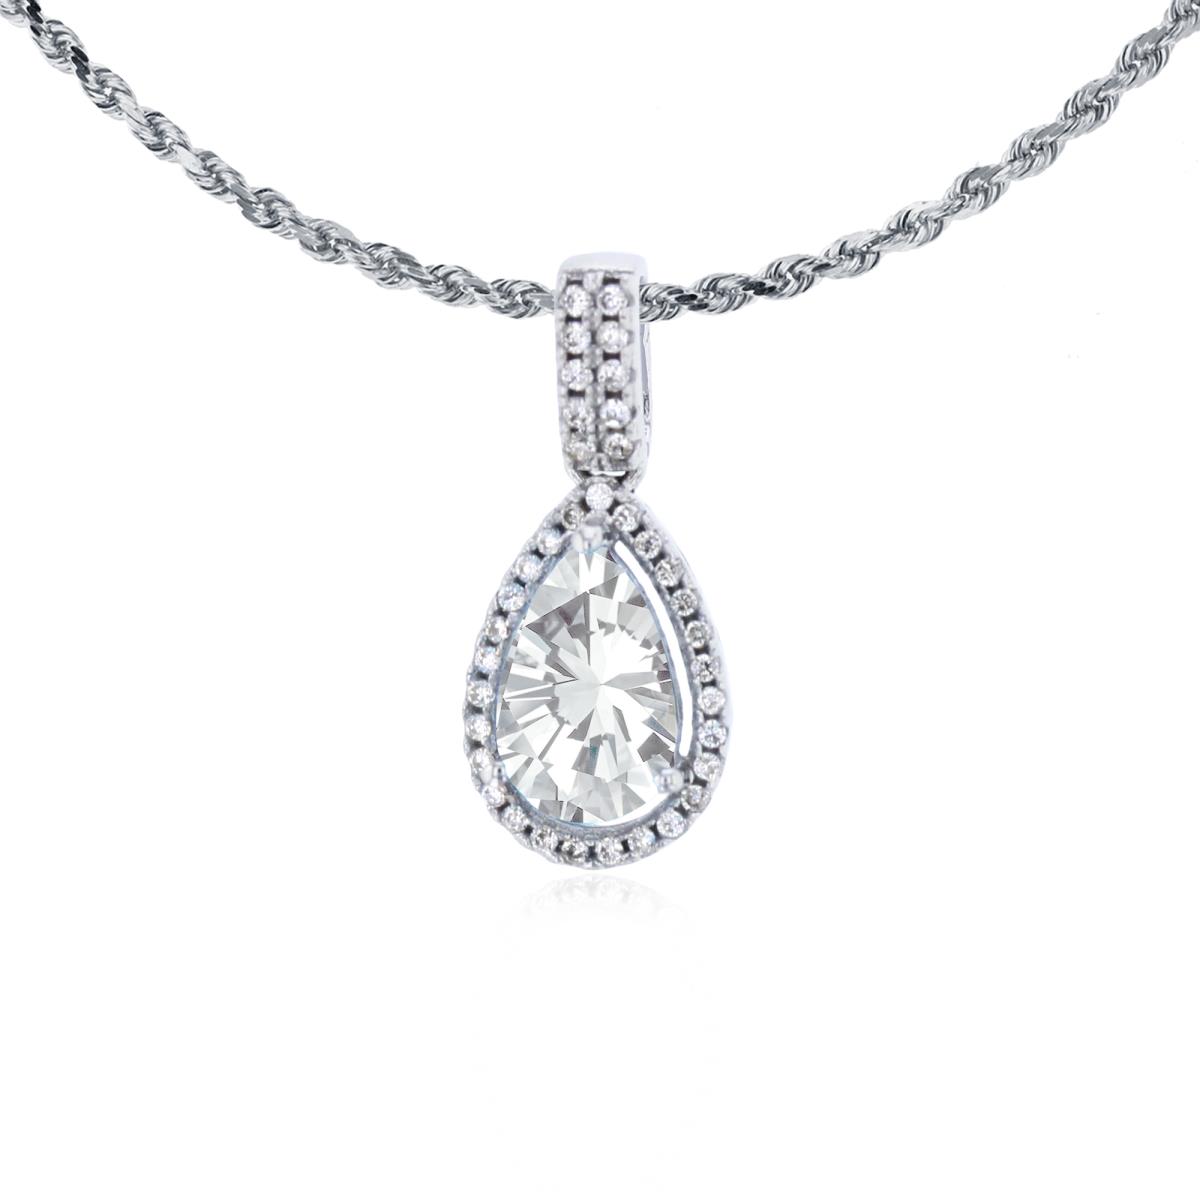 14K White Gold 8x5mm Pear Cut White Topaz & 0.11 CTTW Diamond Halo 18" Rope Chain Necklace